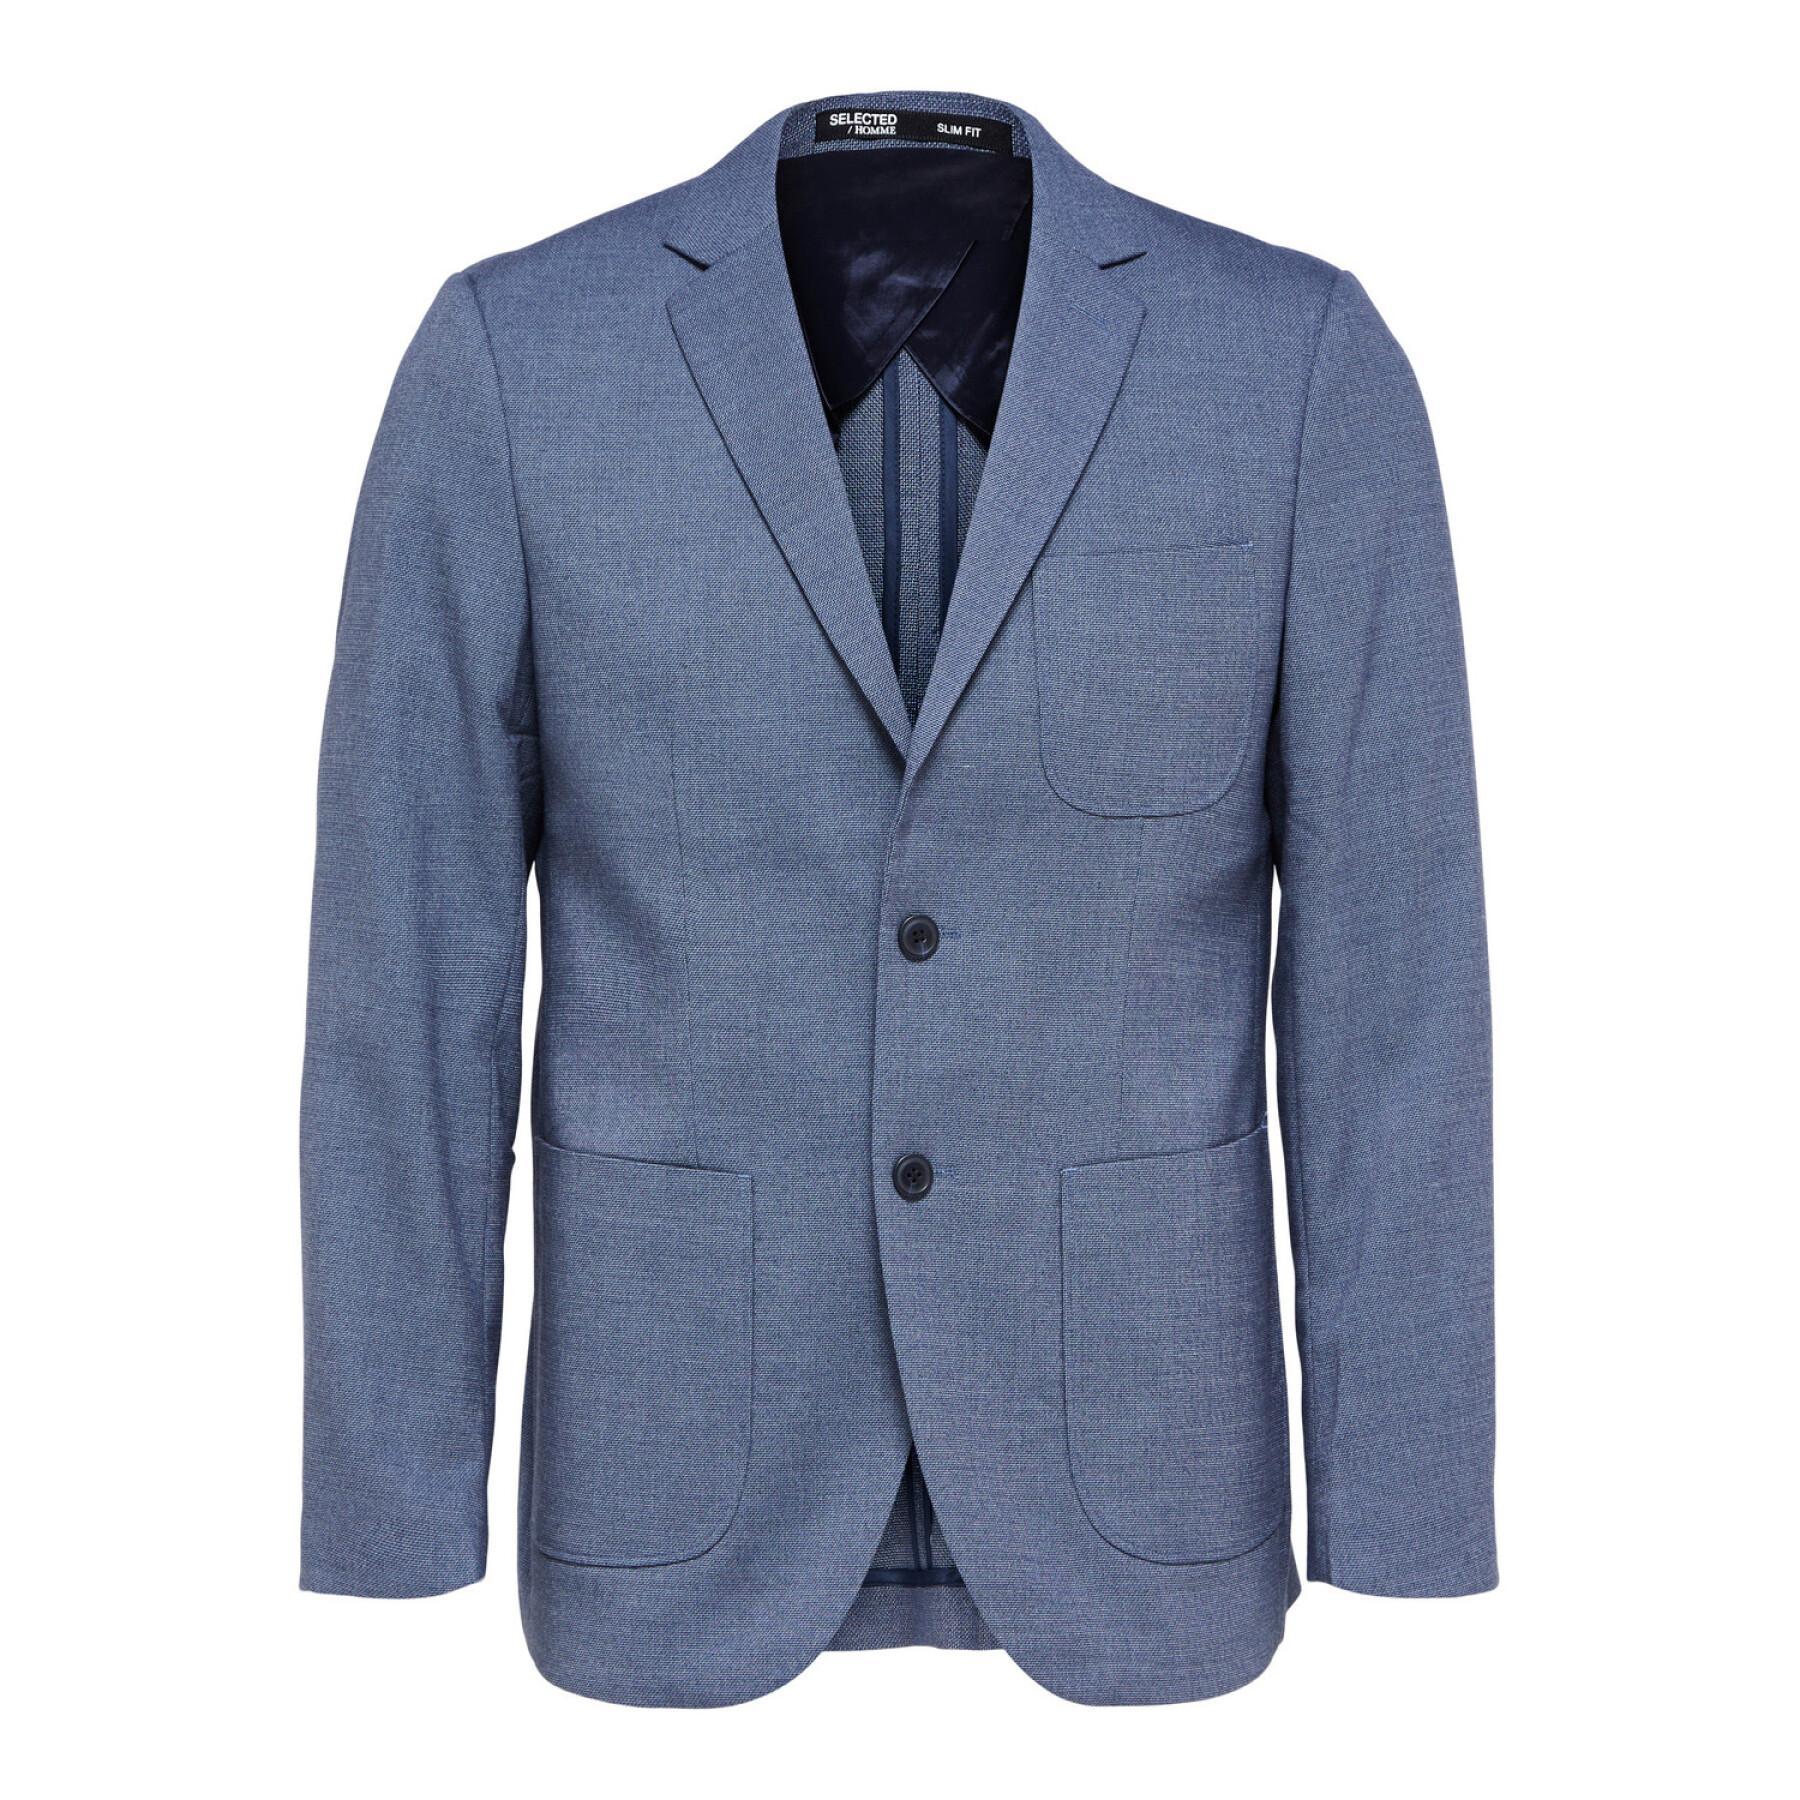 Blazer Selected Gabe Structure